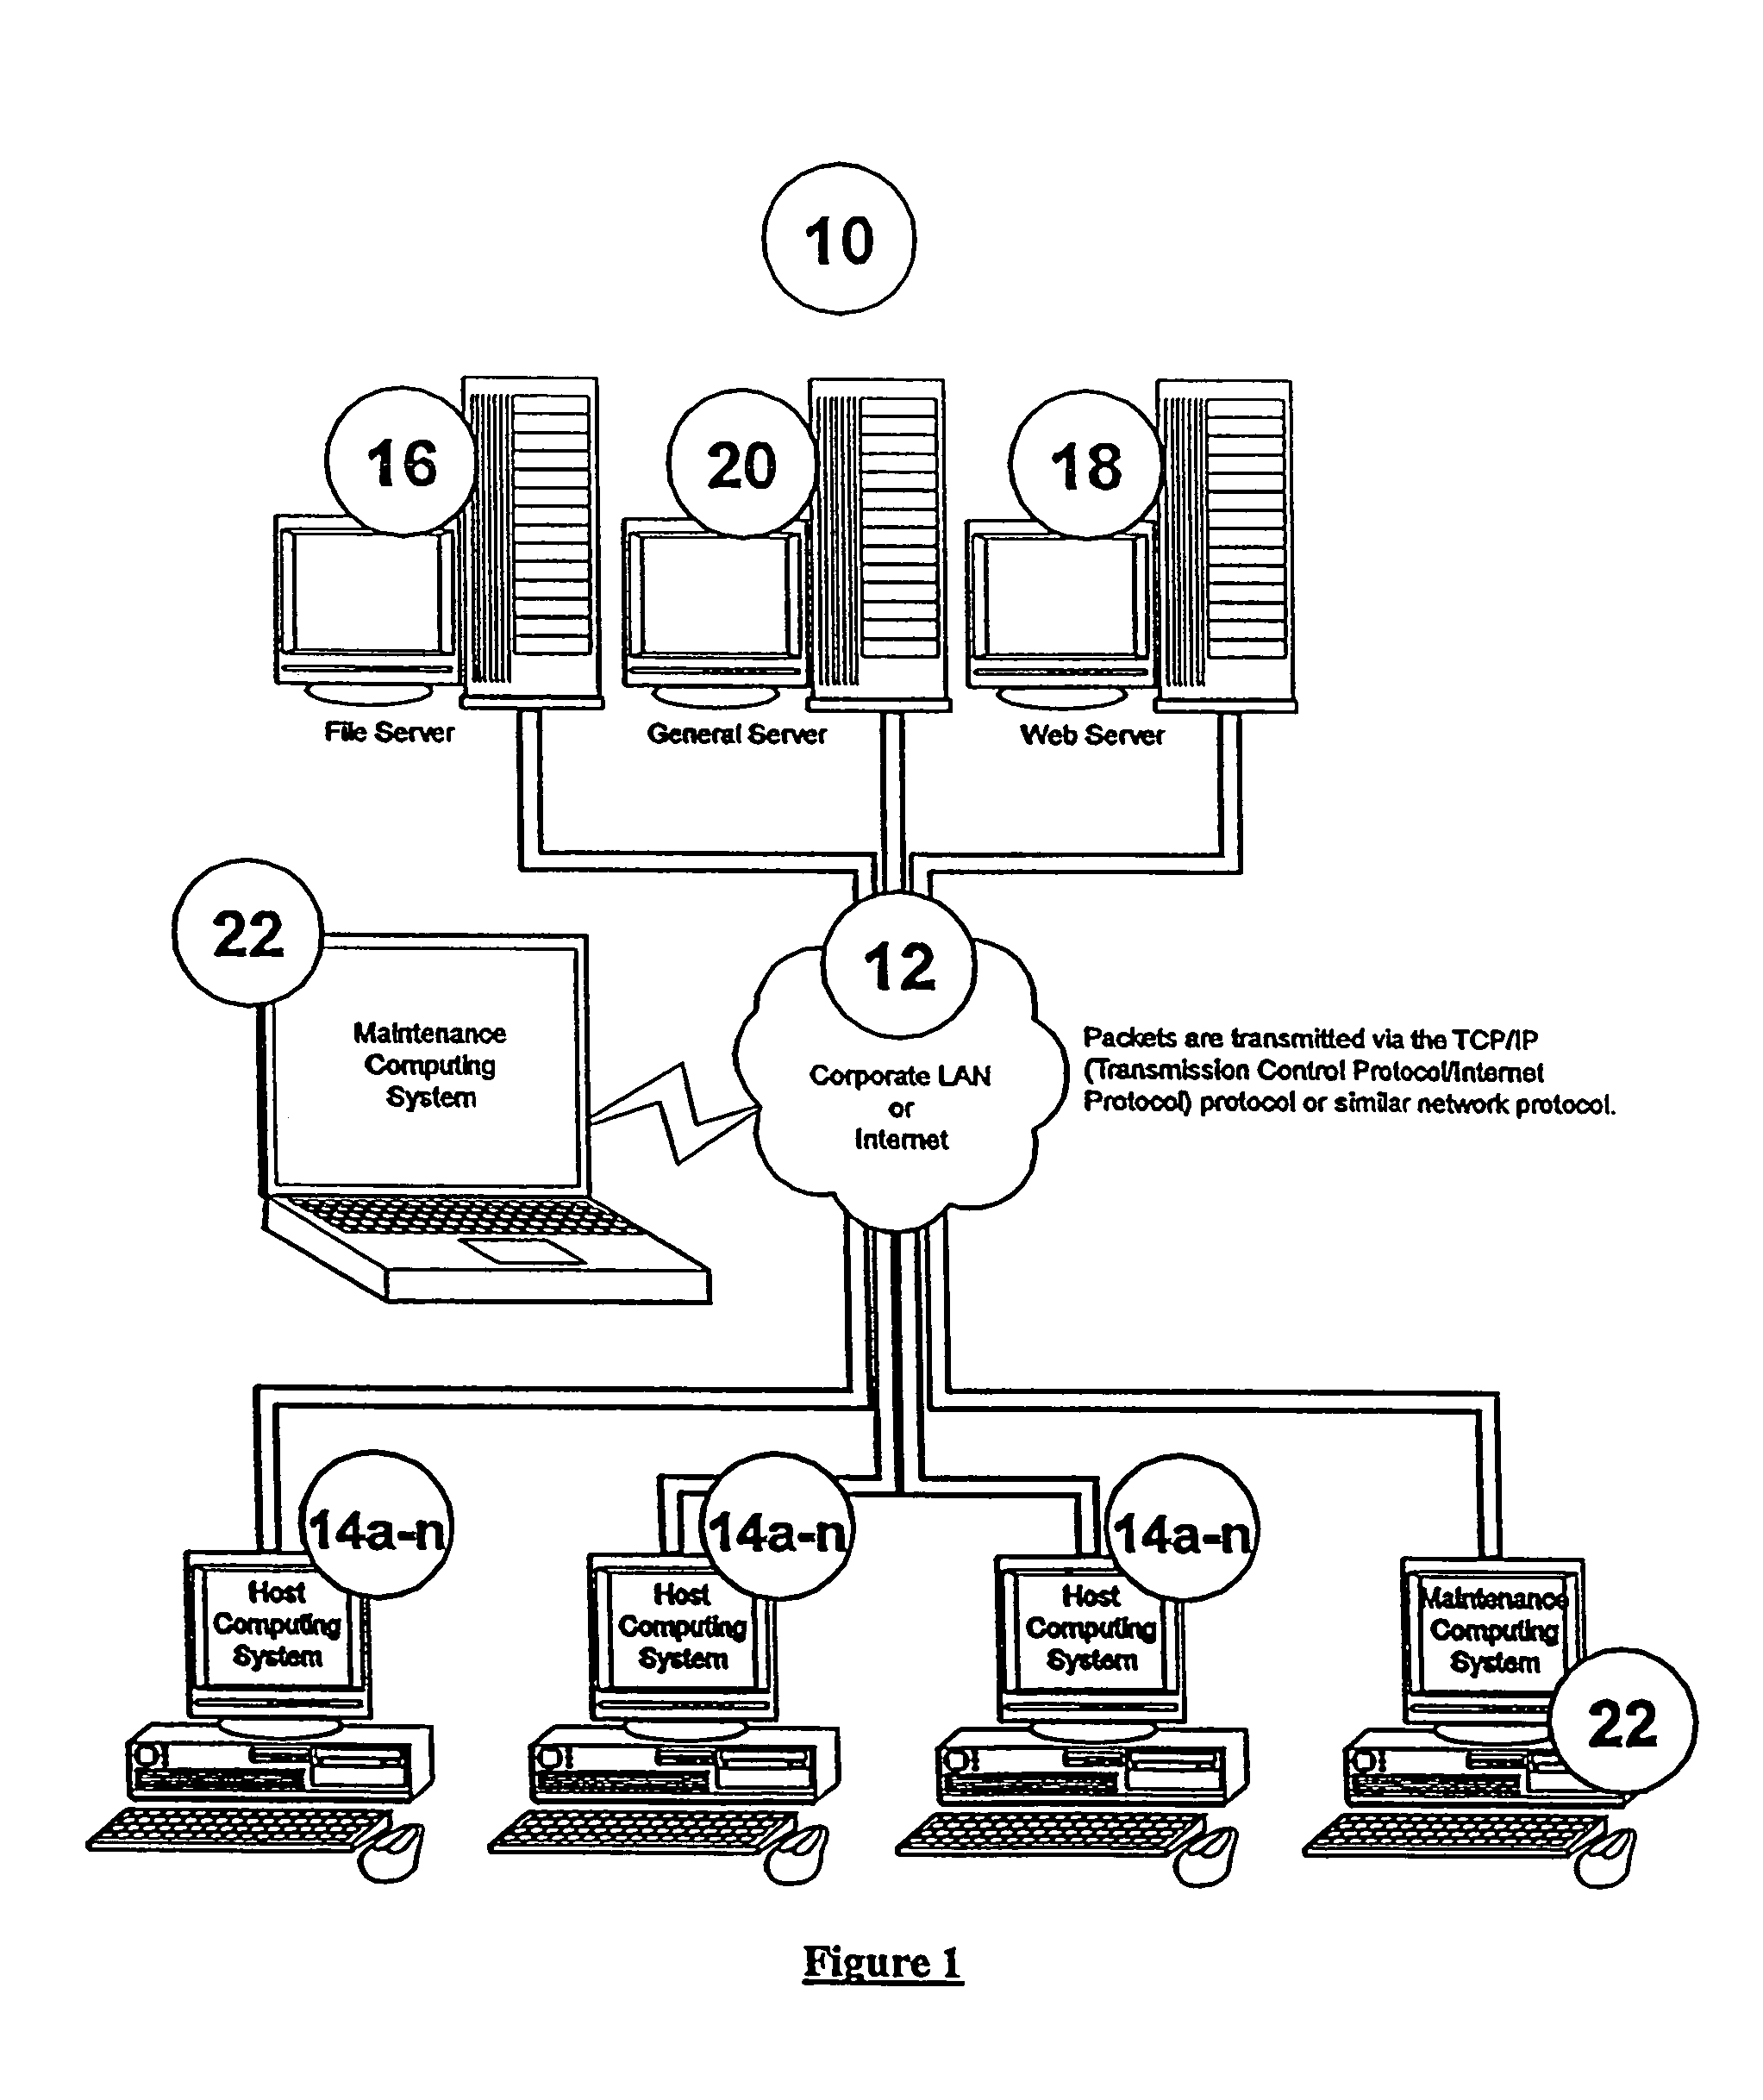 Systems and methods for capturing screen displays from a host computing system for display at a remote terminal